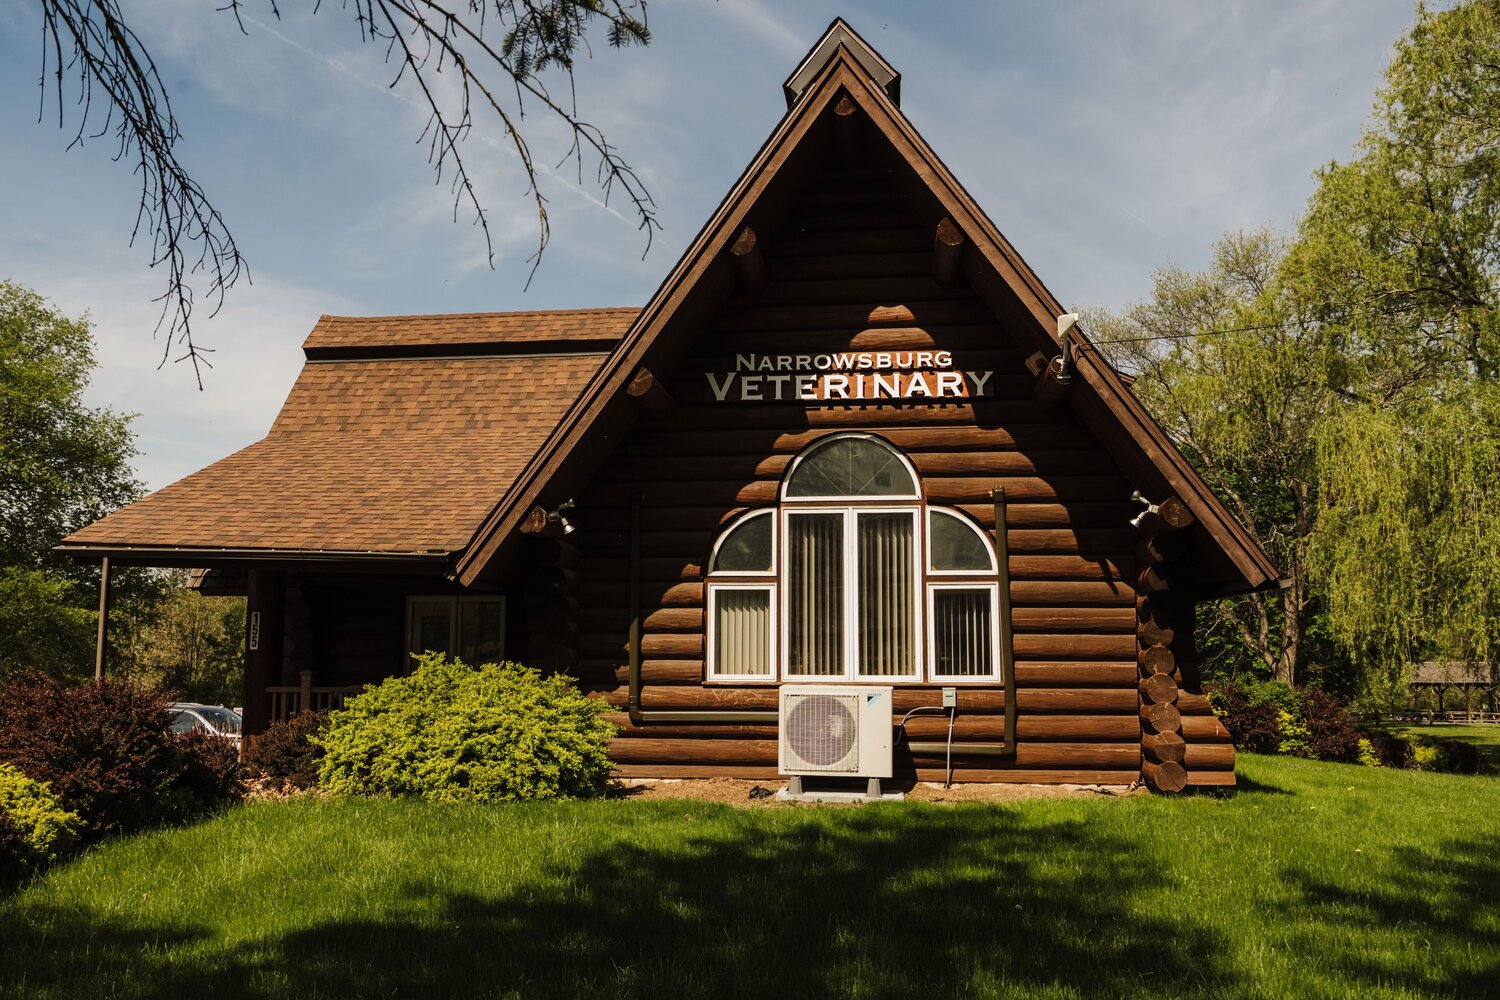 The former Jeff Bank building is now The Narrowsburg Veterinary Hospital.